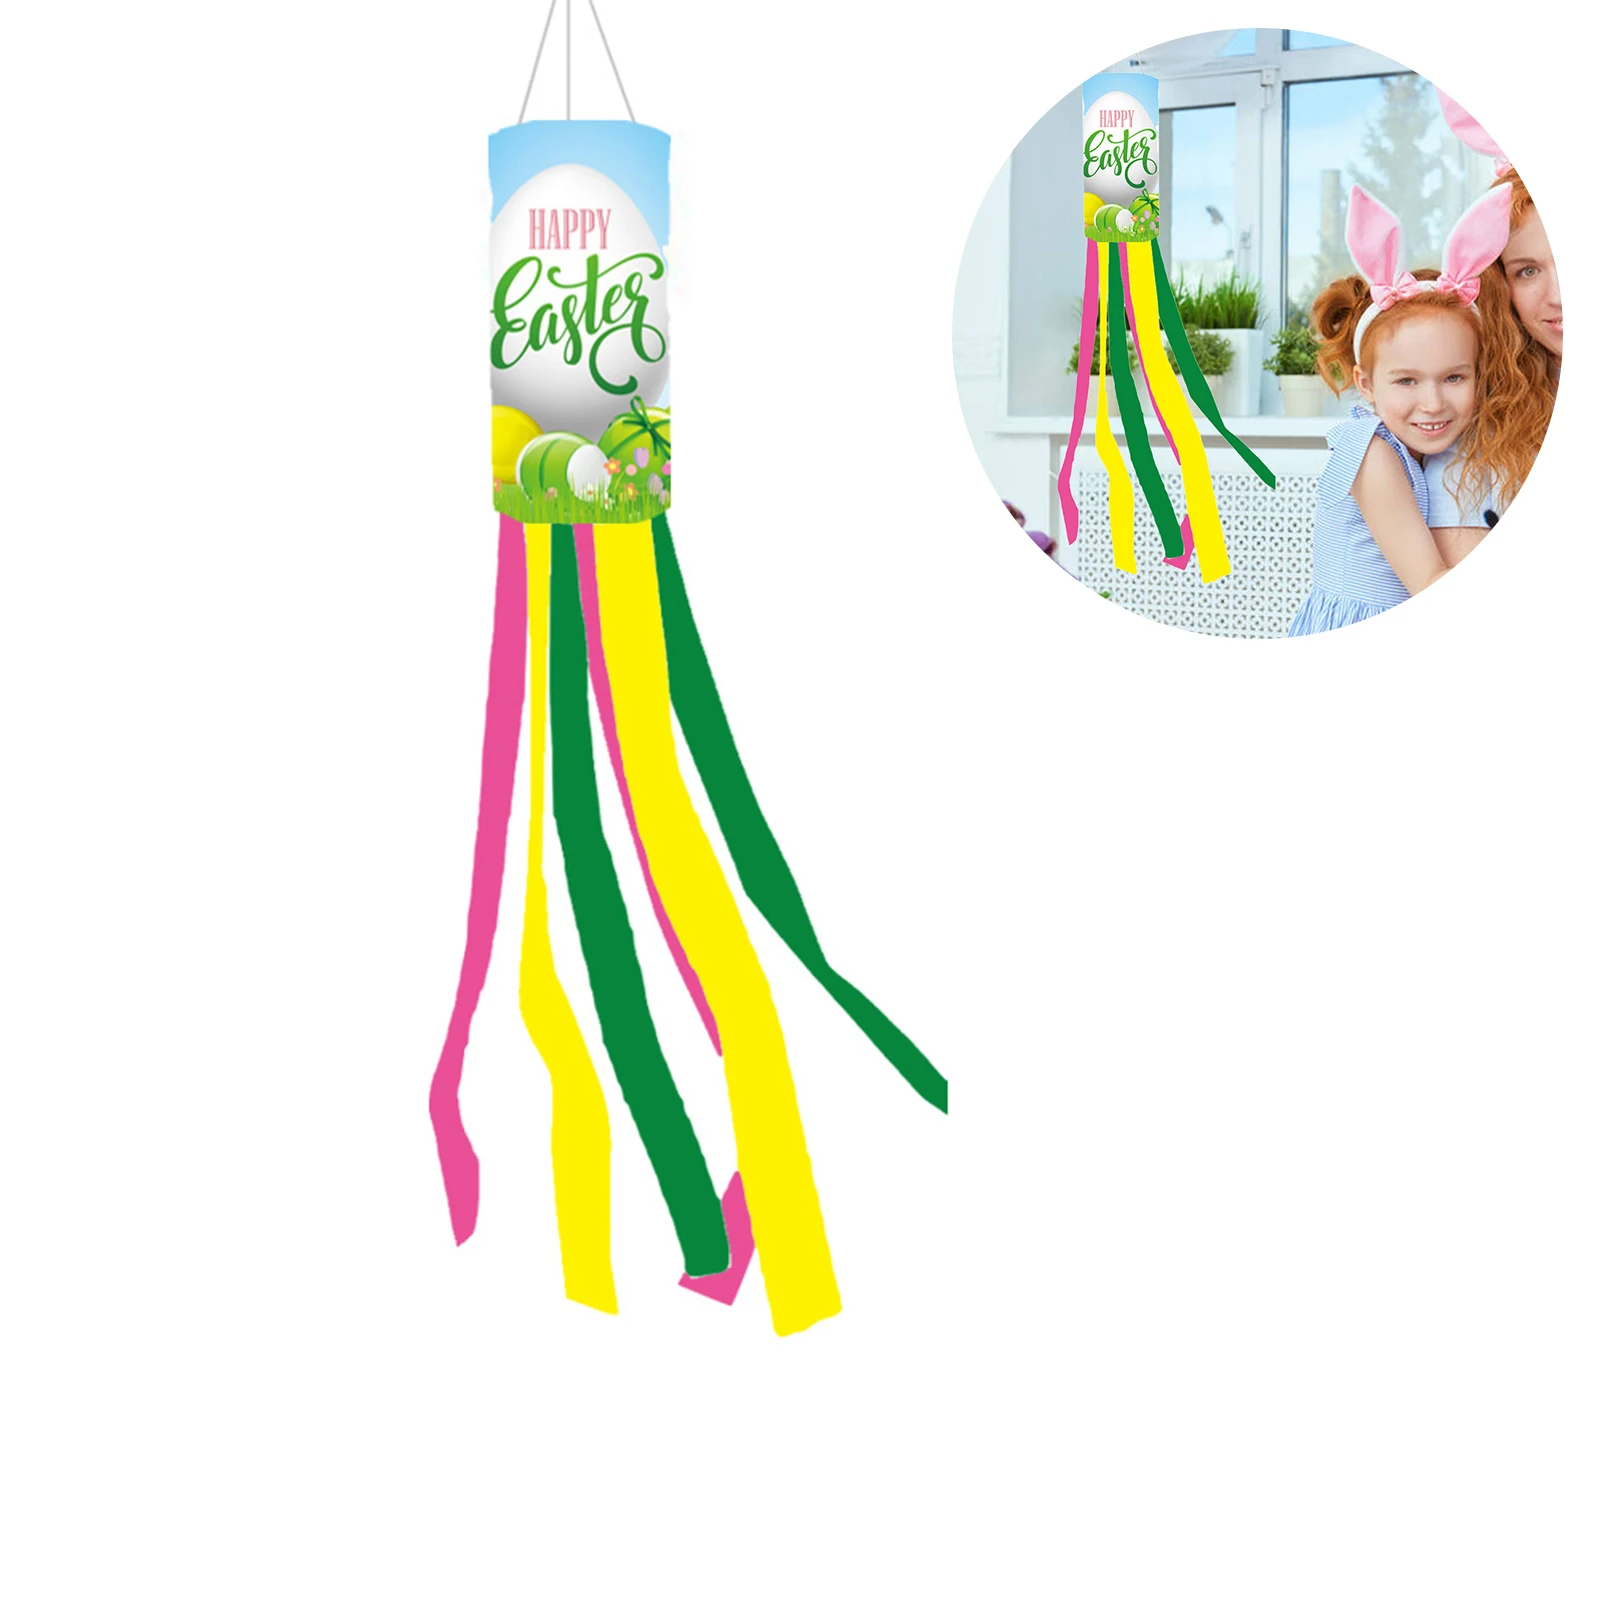 

Easter Day Windsock Bunny Tail Decorative Windsock Happy Easter Wind Bag For Party Hangings Home Outdoor Garden Yard Decoration